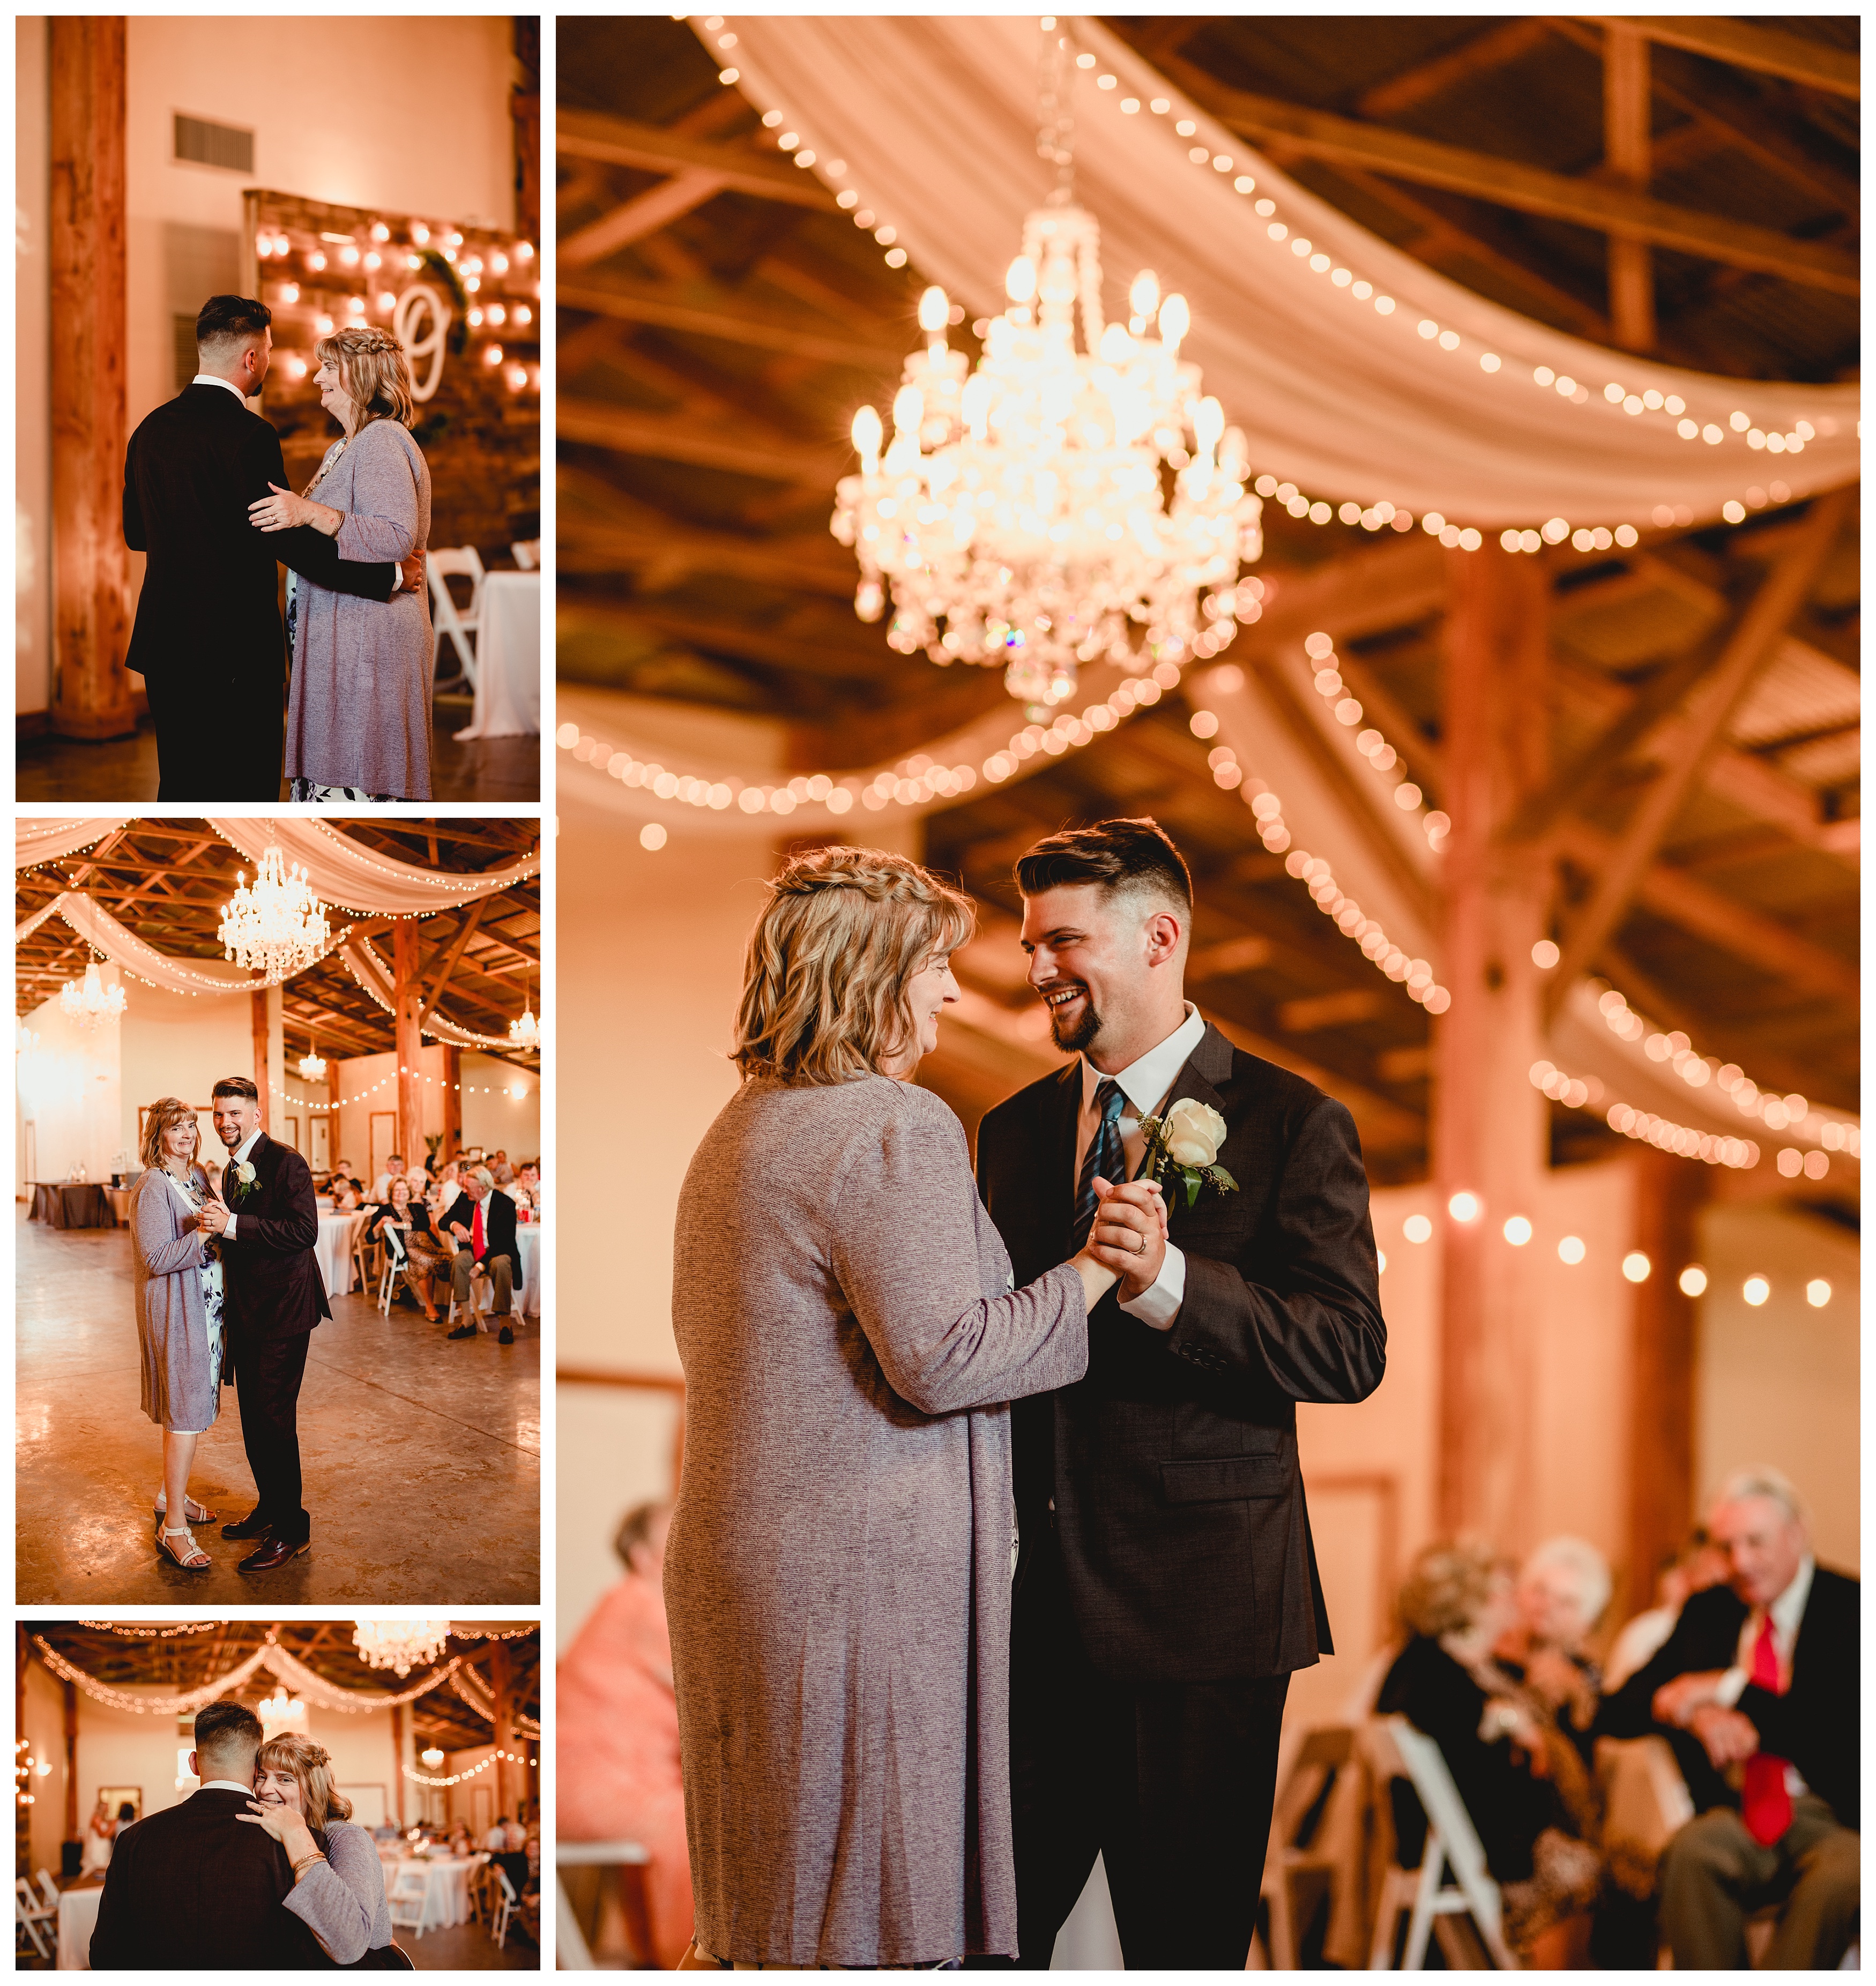 Mother and son first dance on wedding day. Shelly Williams Photography